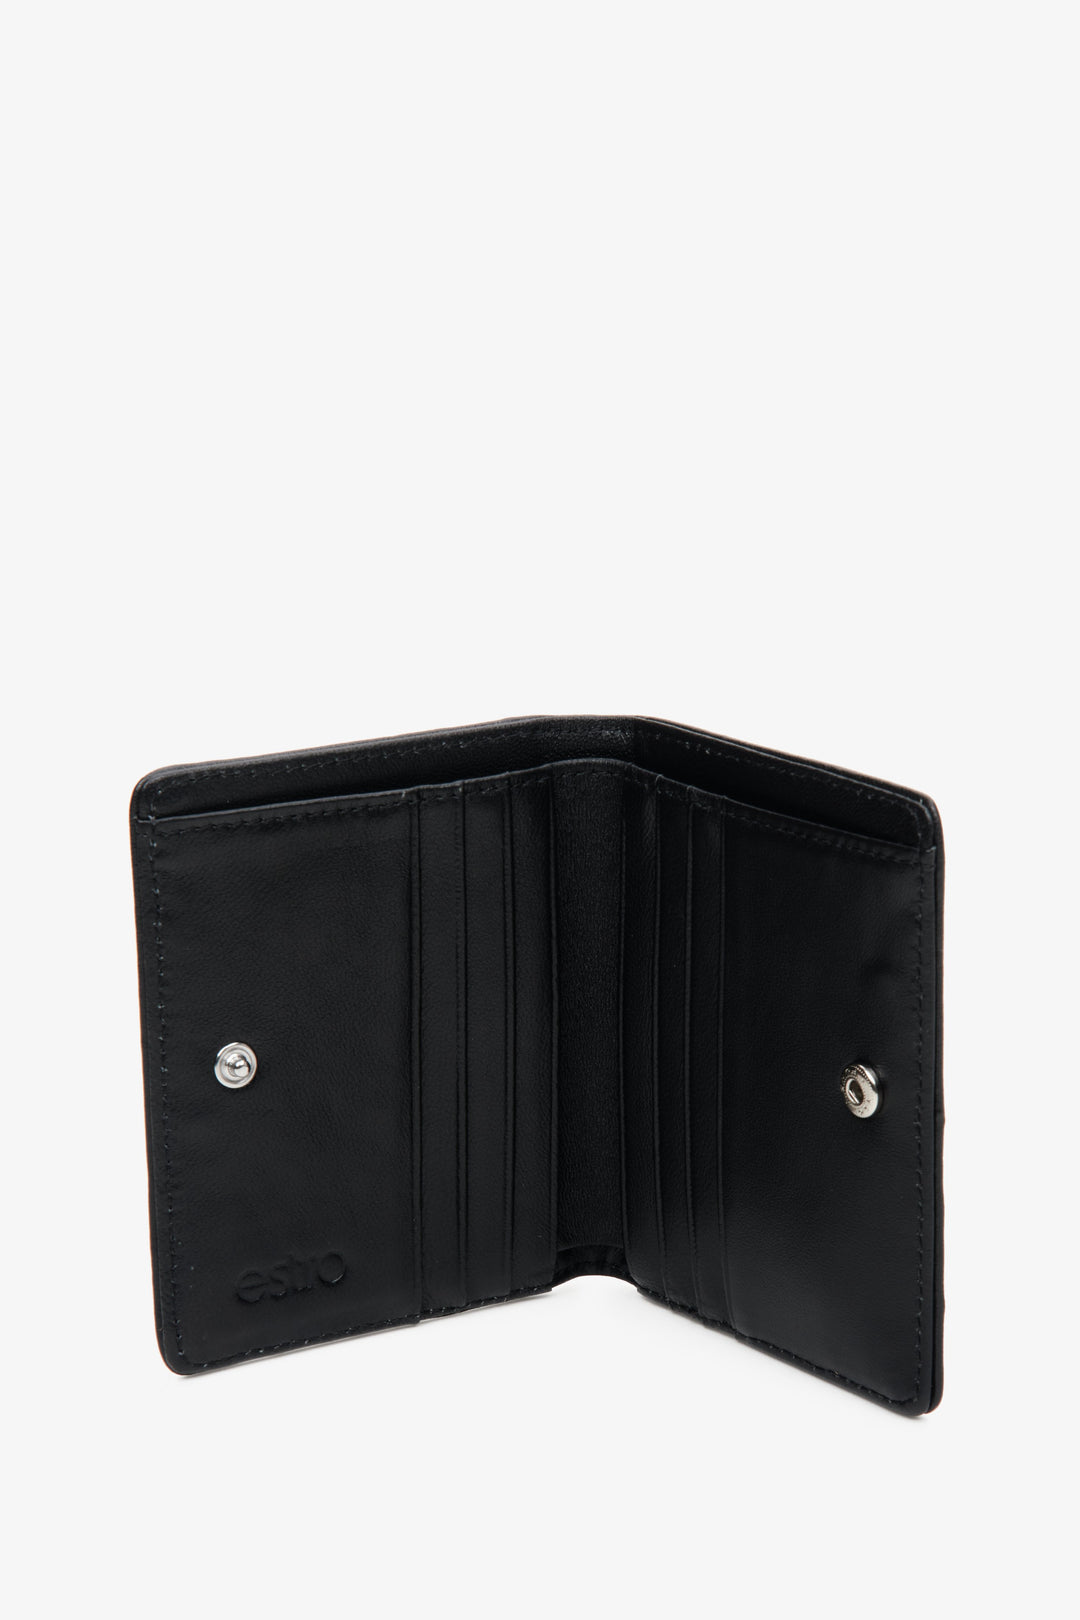 Small women's black card wallet by Estro made of genuine leather - interior view of the model.